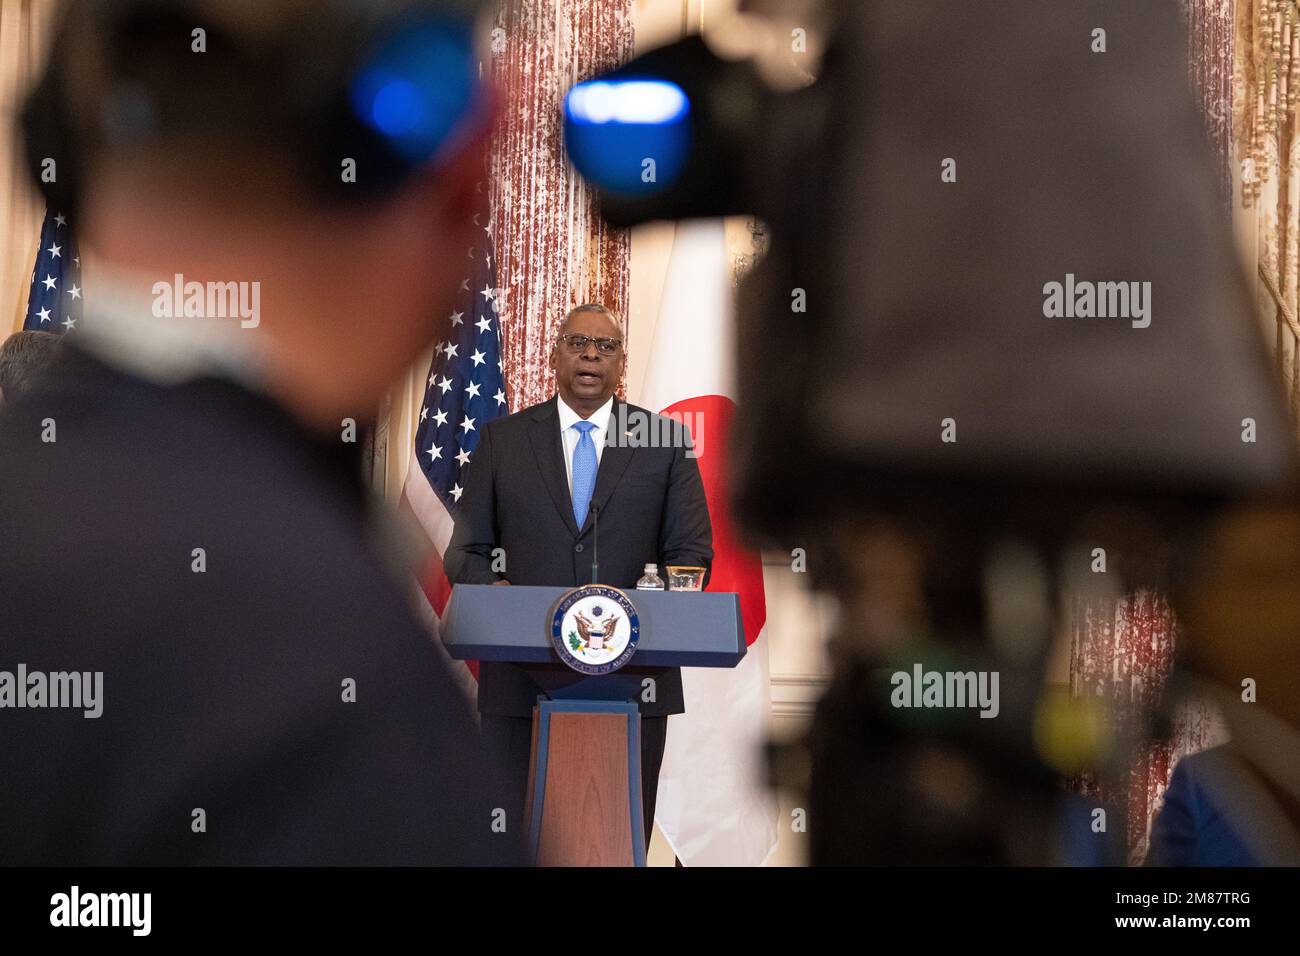 Washington, United States Of America. 11th Jan, 2023. Washington, United States of America. 11 January, 2023. U.S. Secretary of Defense Lloyd Austin, replies to a question during a joint press conference with Japanese and U.S officials at the Department of State, January 11, 2023 in Washington, DC Credit: Freddie Everett/US Secretary of State/Alamy Live News Stock Photo